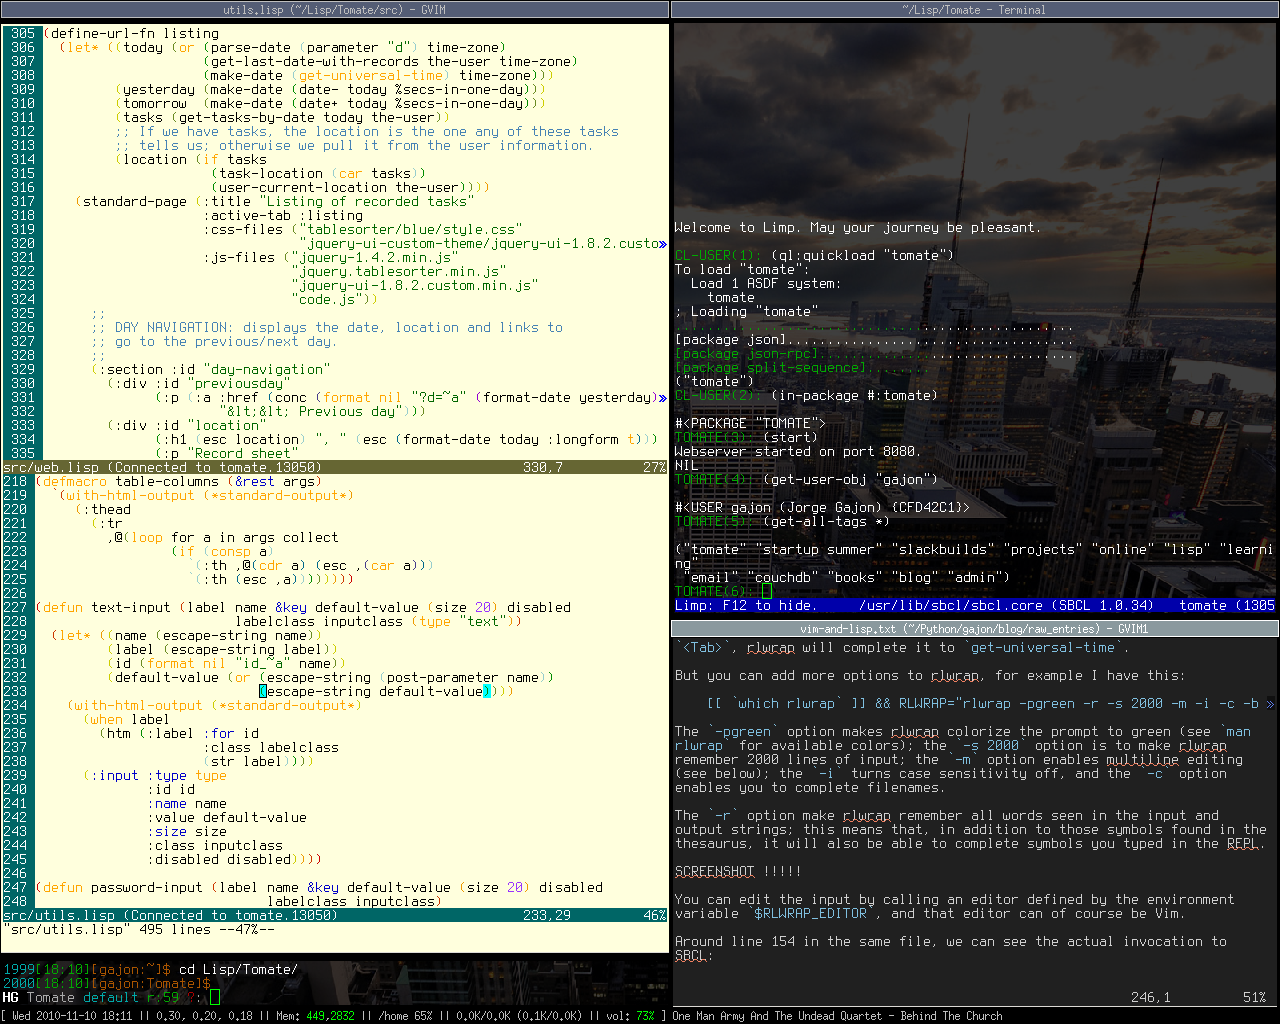 Screenshot, Common Lisp development with Vim and Limp, and the Ion3 Window Manager